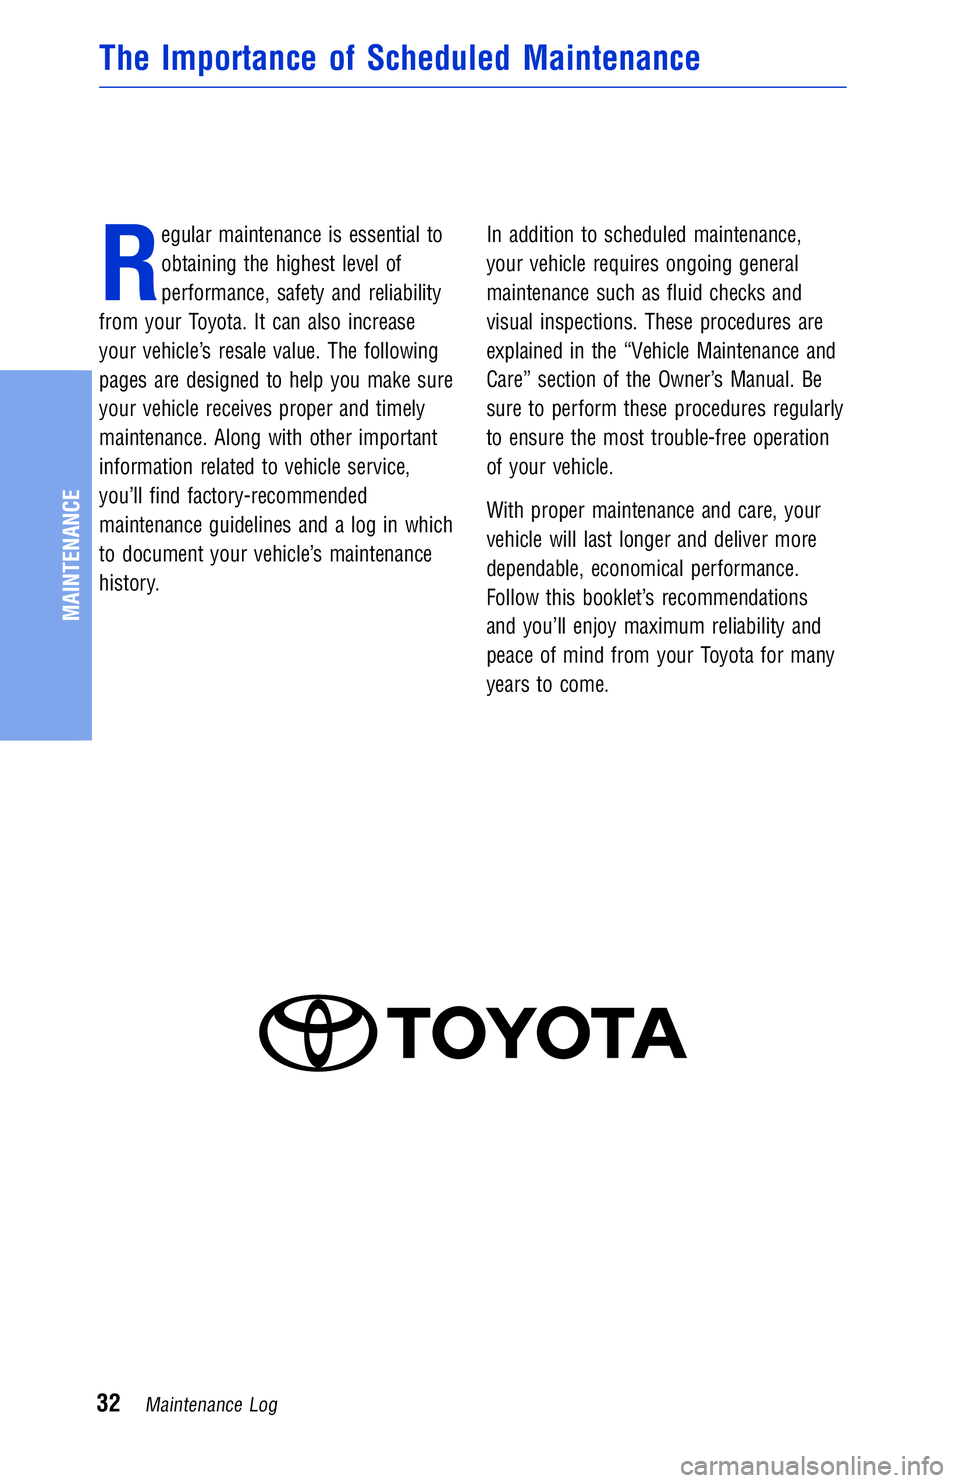 TOYOTA VENZA 2012  Warranties & Maintenance Guides (in English) R
egular maintenance is essential to
obtaining the highest level of
performance, safety and reliability
from your Toyota. It can also increase
your vehicle’s resale value. The following
pages are de